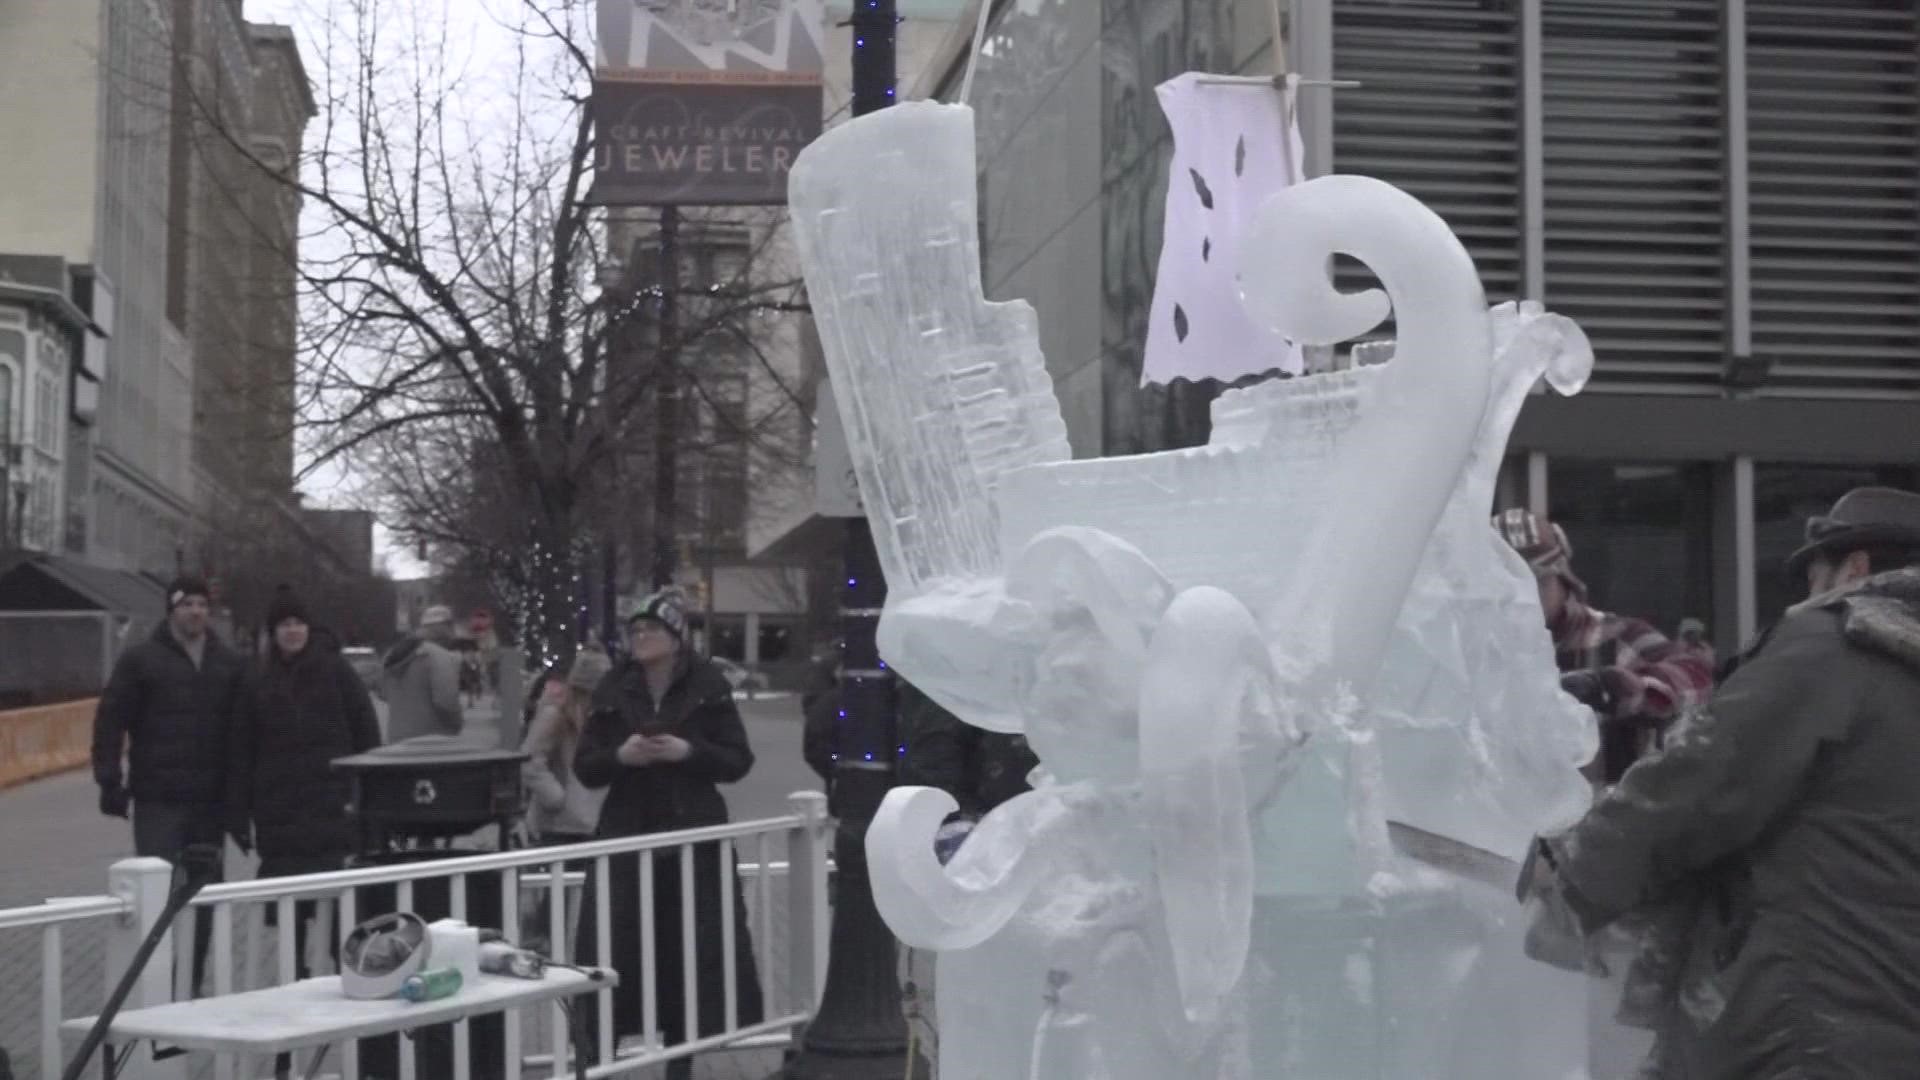 More than 100 ice sculptures have returned to downtown Grand Rapids for Valentine's weekend.